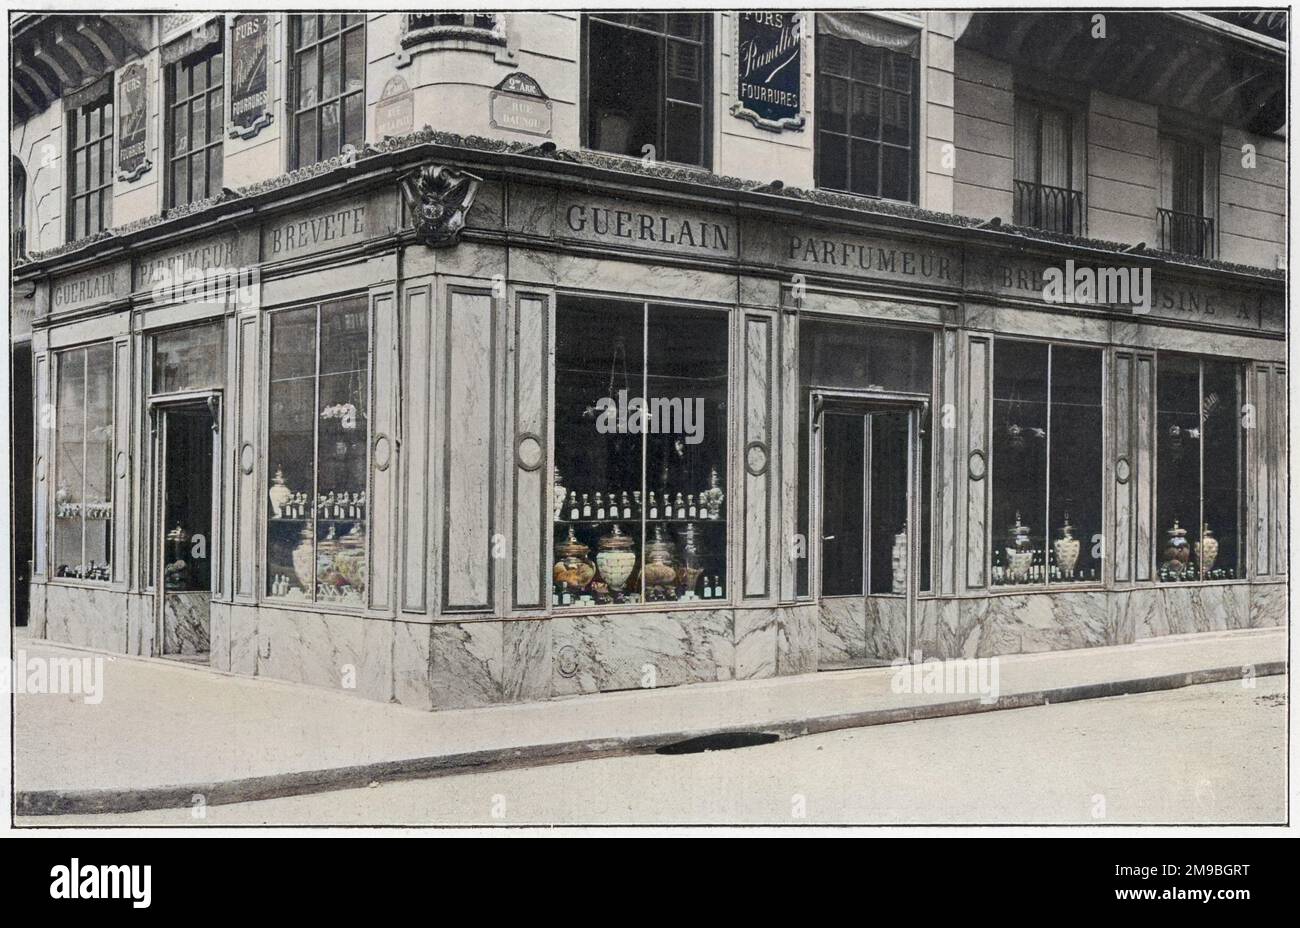 Exterior of the Maison Guerlain perfume house in Paris, France Colourised  version of : 10097889 Date: 1909 Stock Photo - Alamy